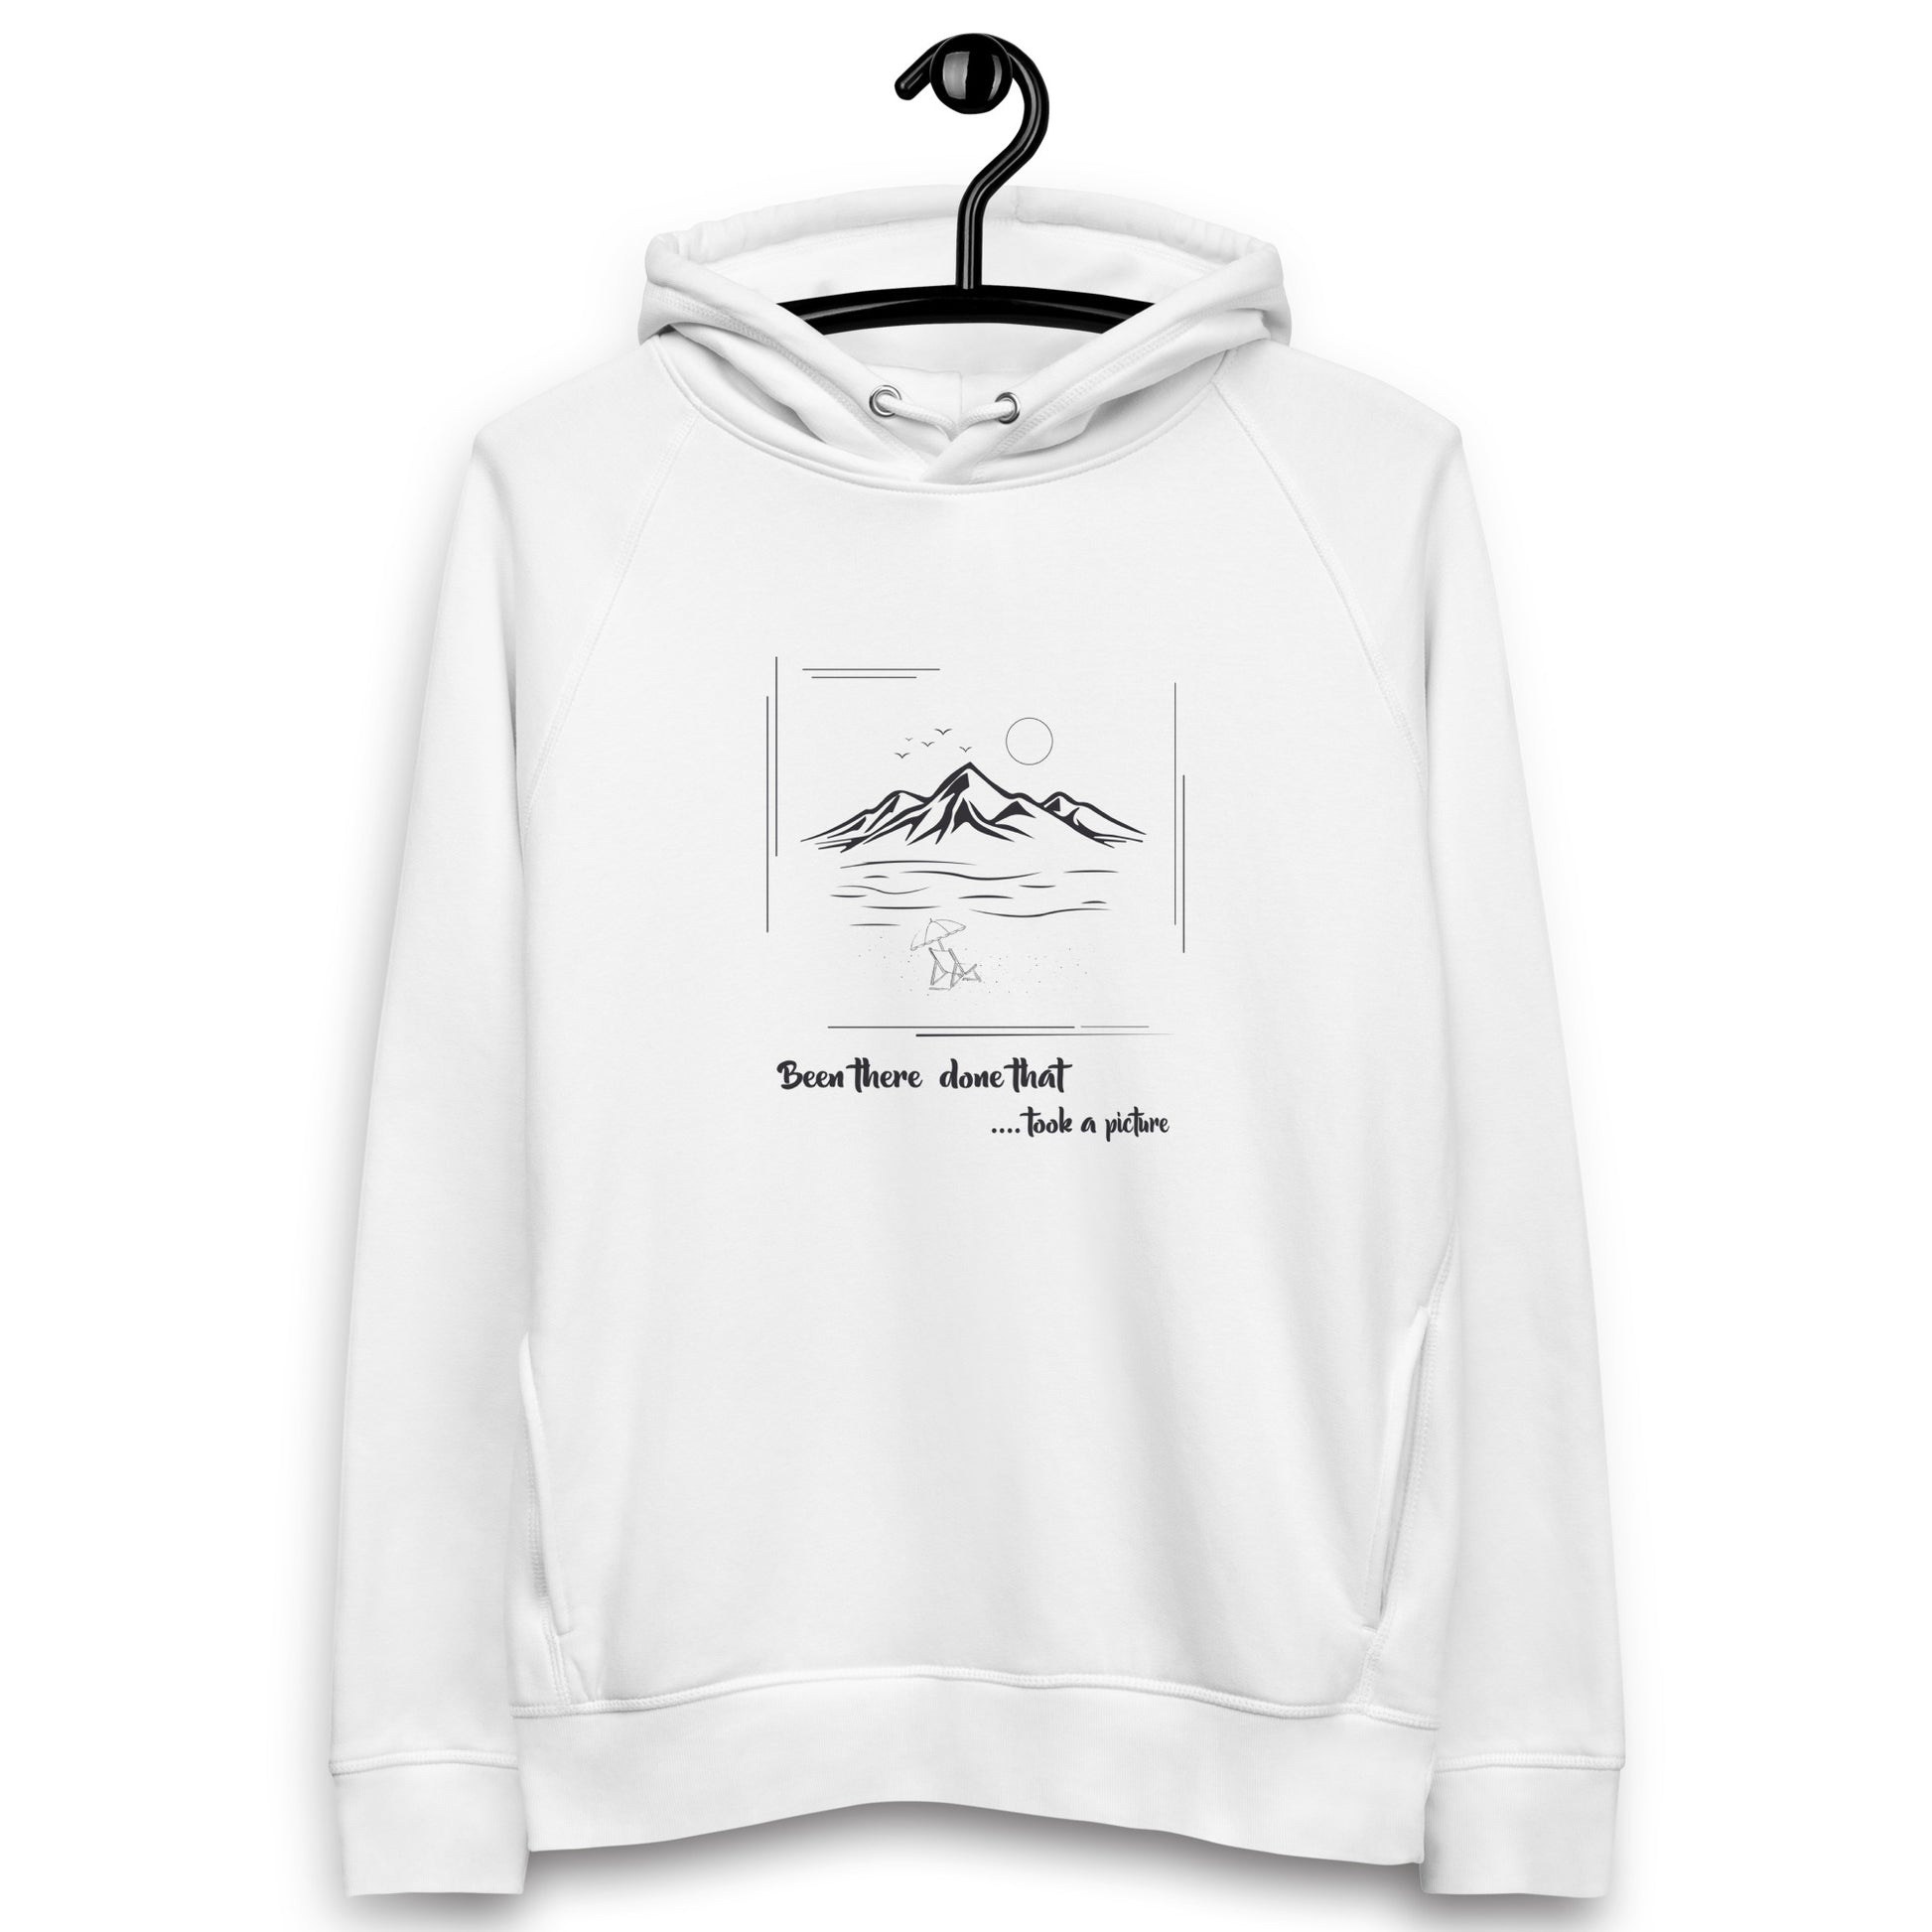 Been there took a picture - Unisex pullover hoodie - HobbyMeFree